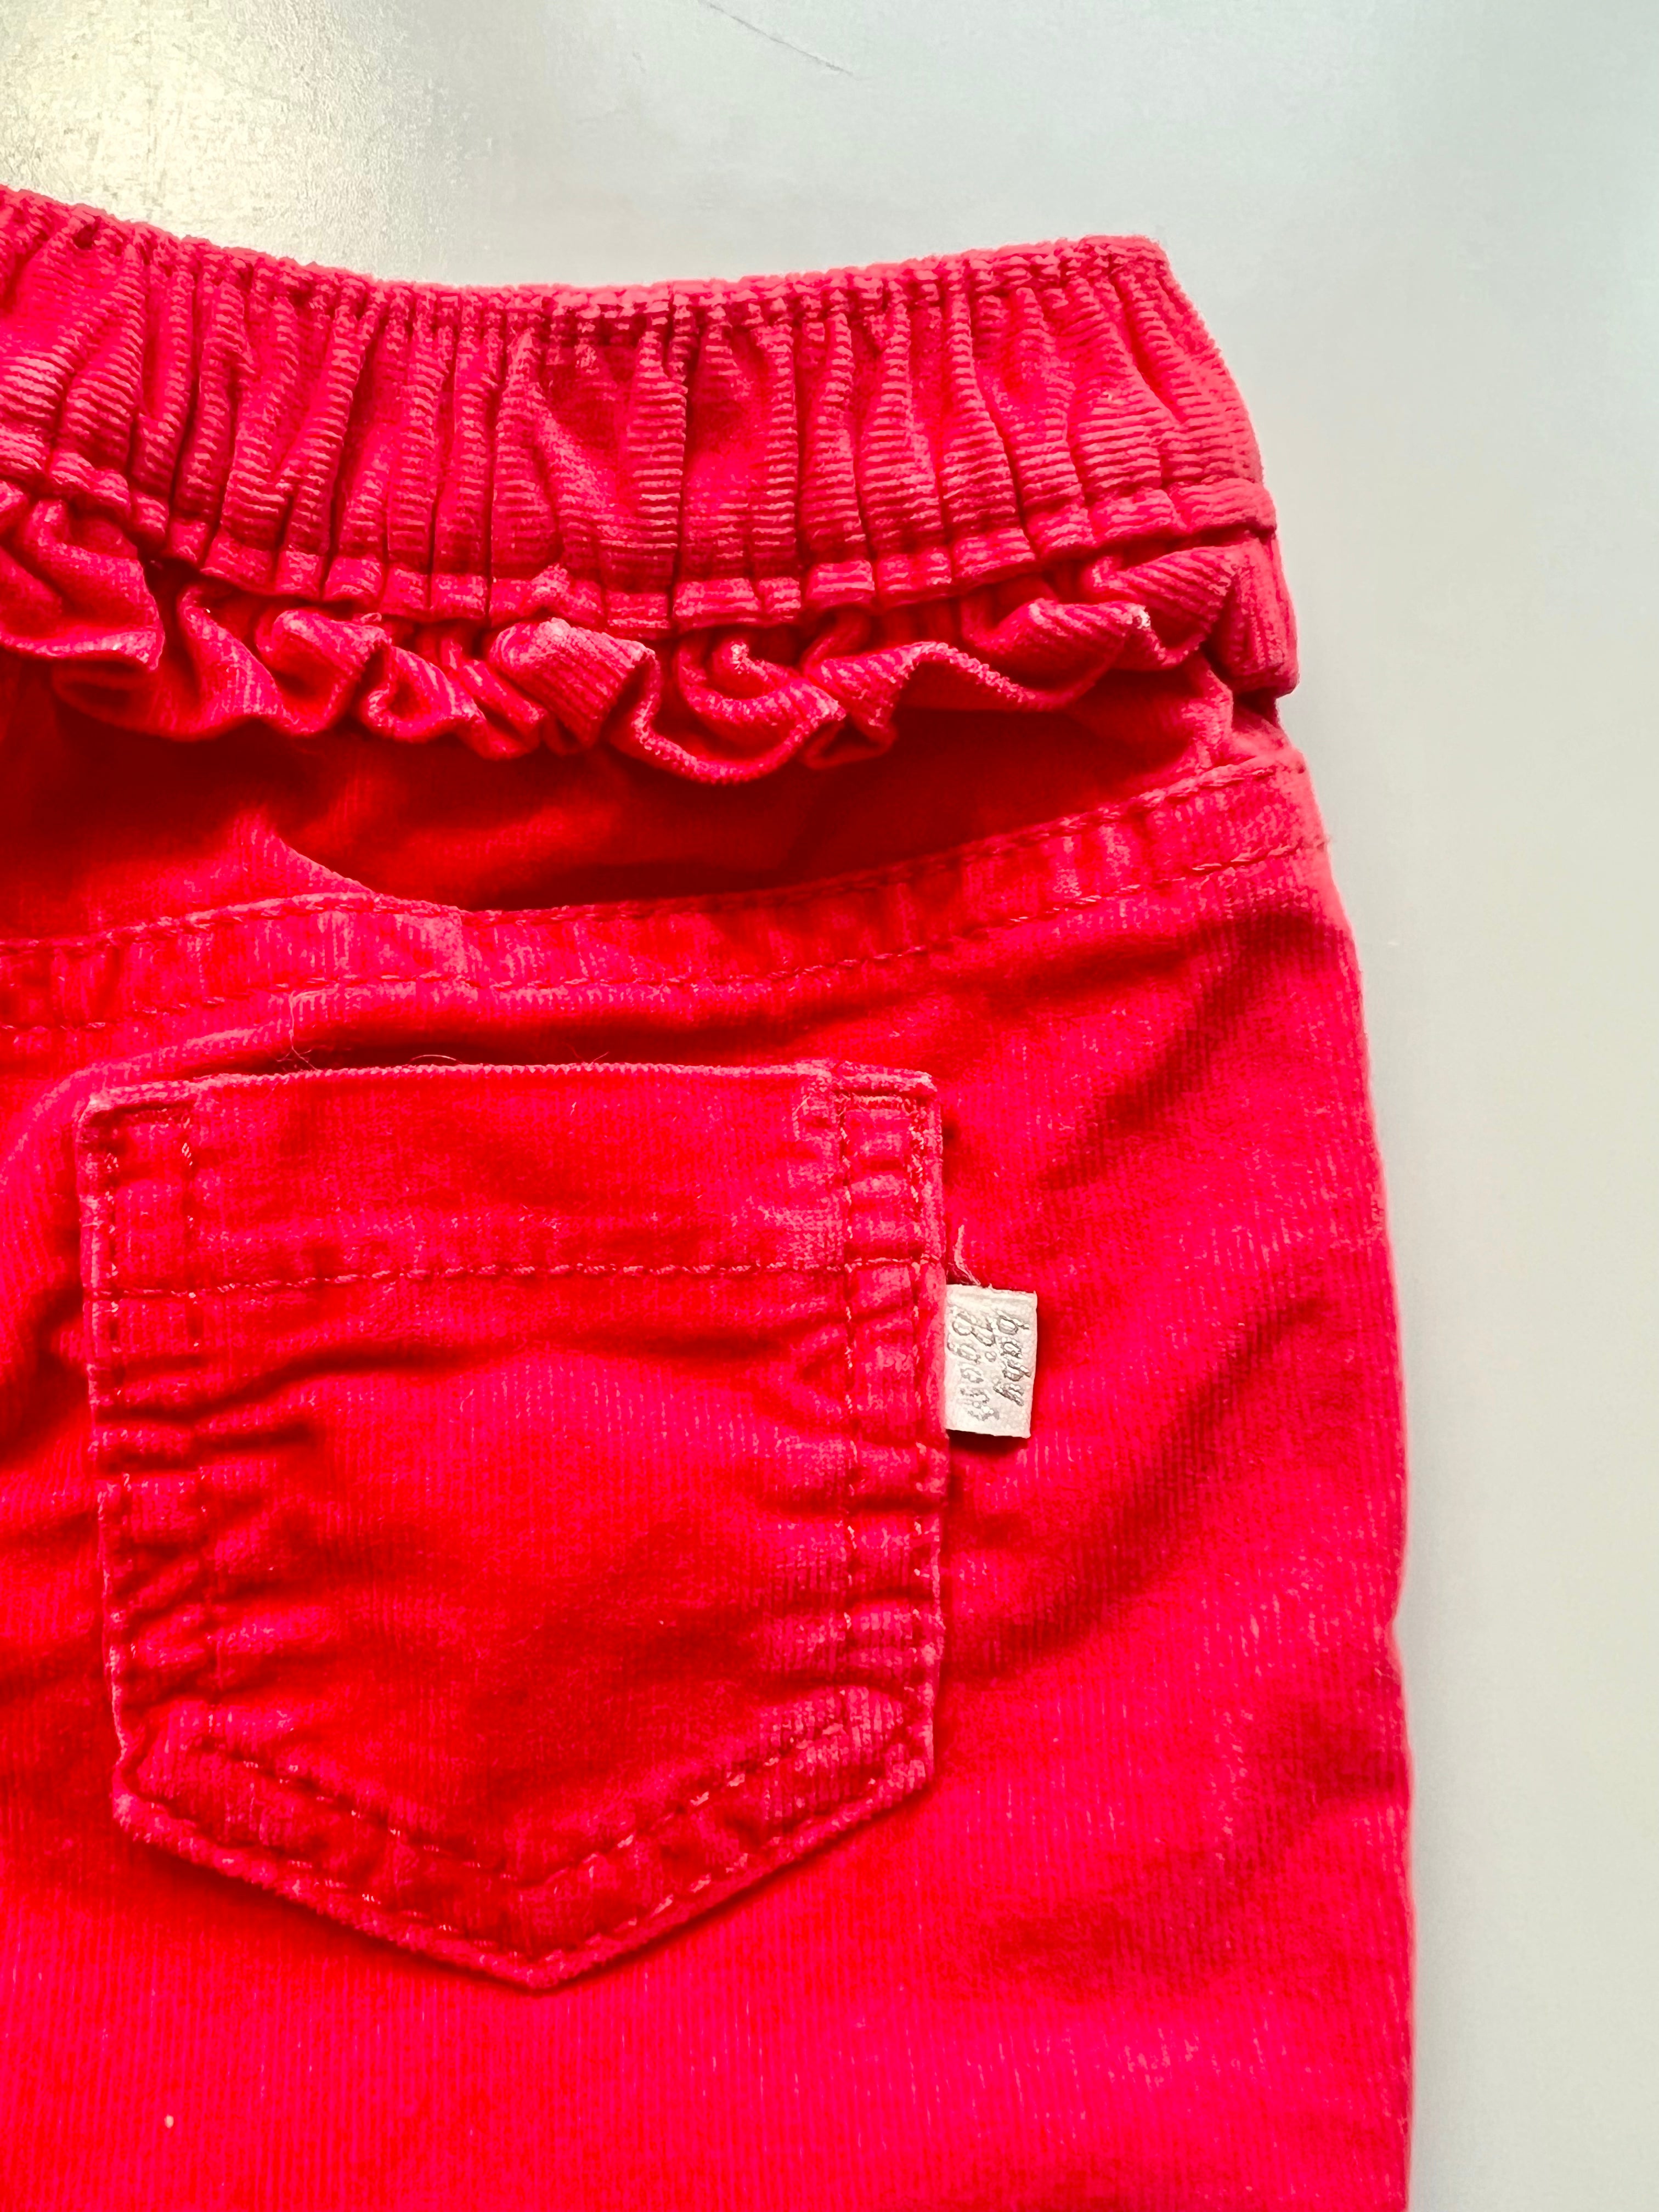 Baby B'gosh Red Needlecord Trousers 6 Months